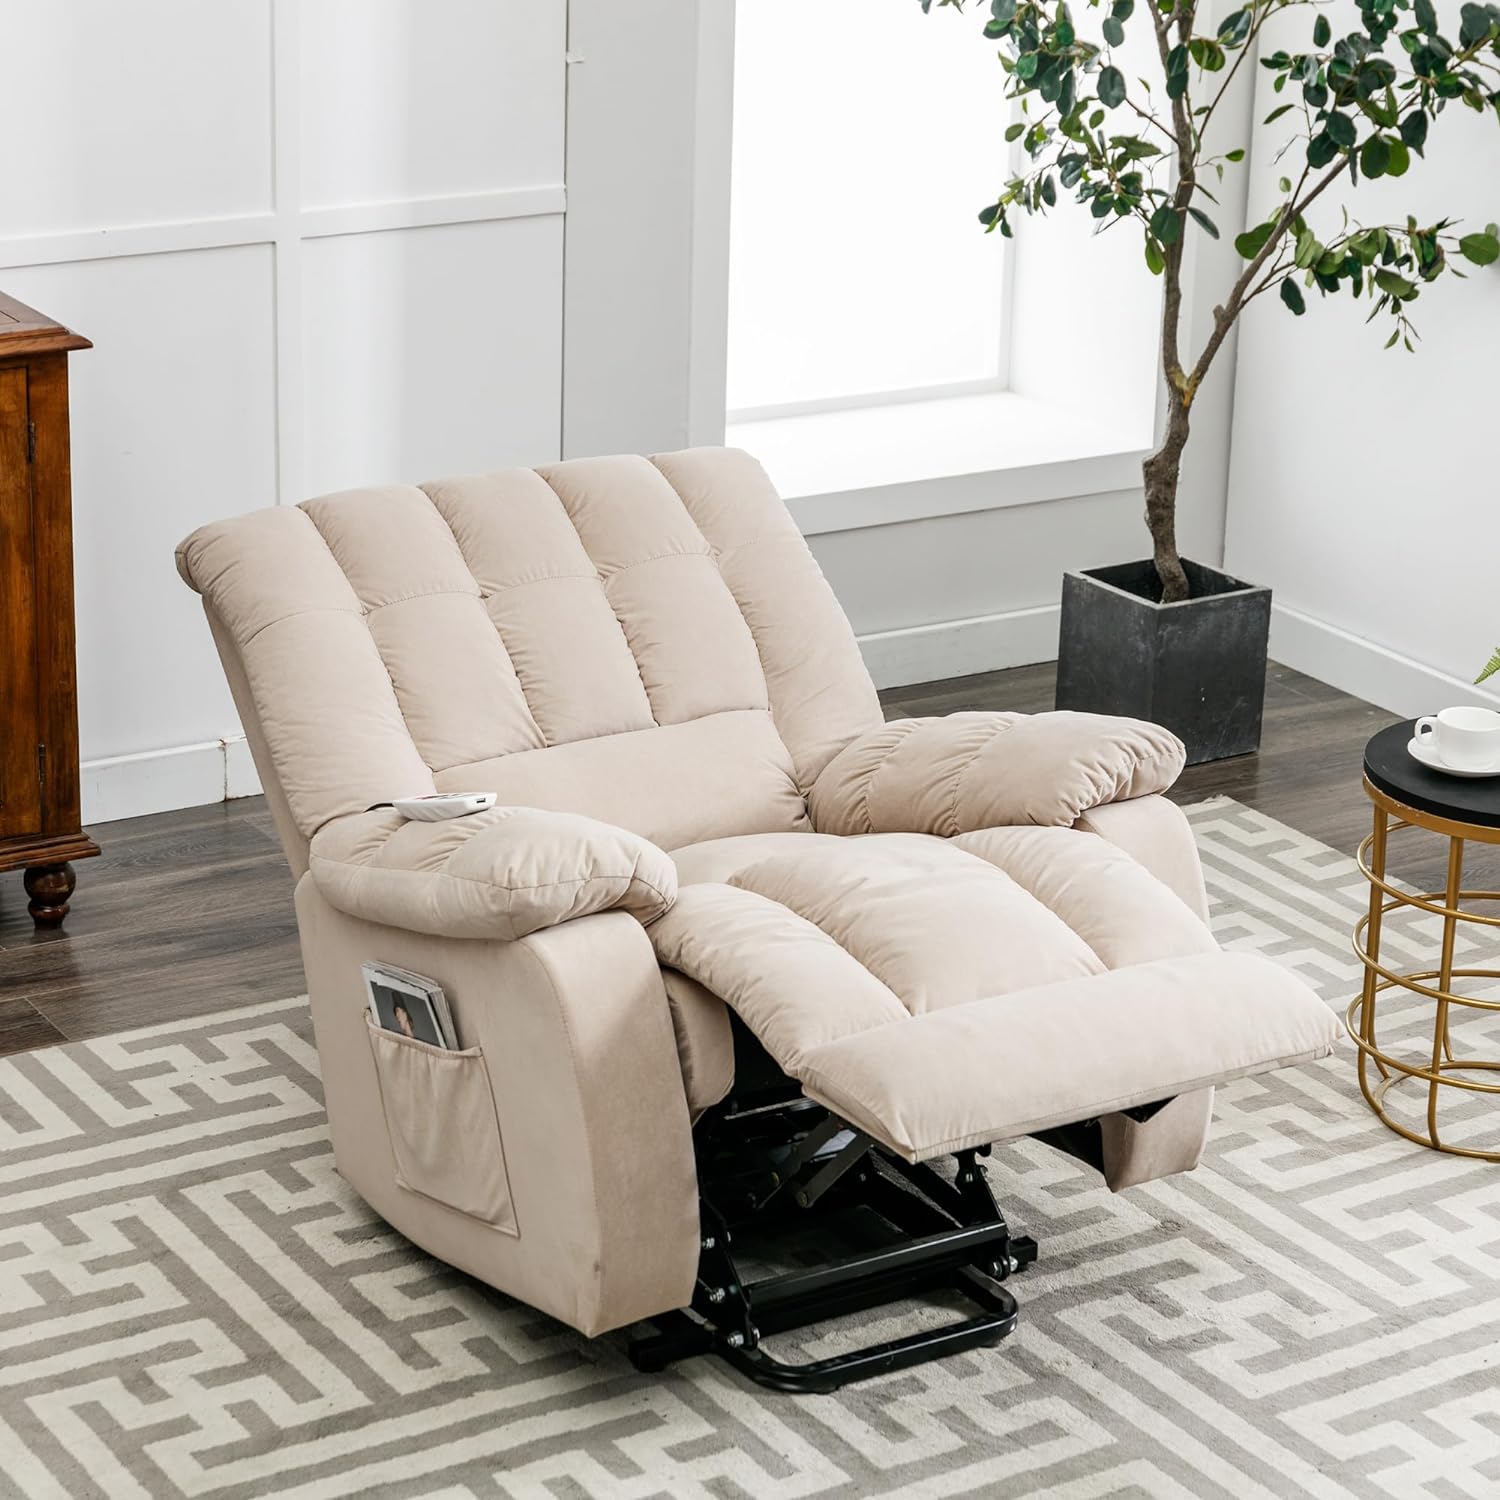 Lifeand Massage Electric Power Lift Recliner Chairs with Heat, Vibration, Side Pocket for Living Room, Bedroom, Beige